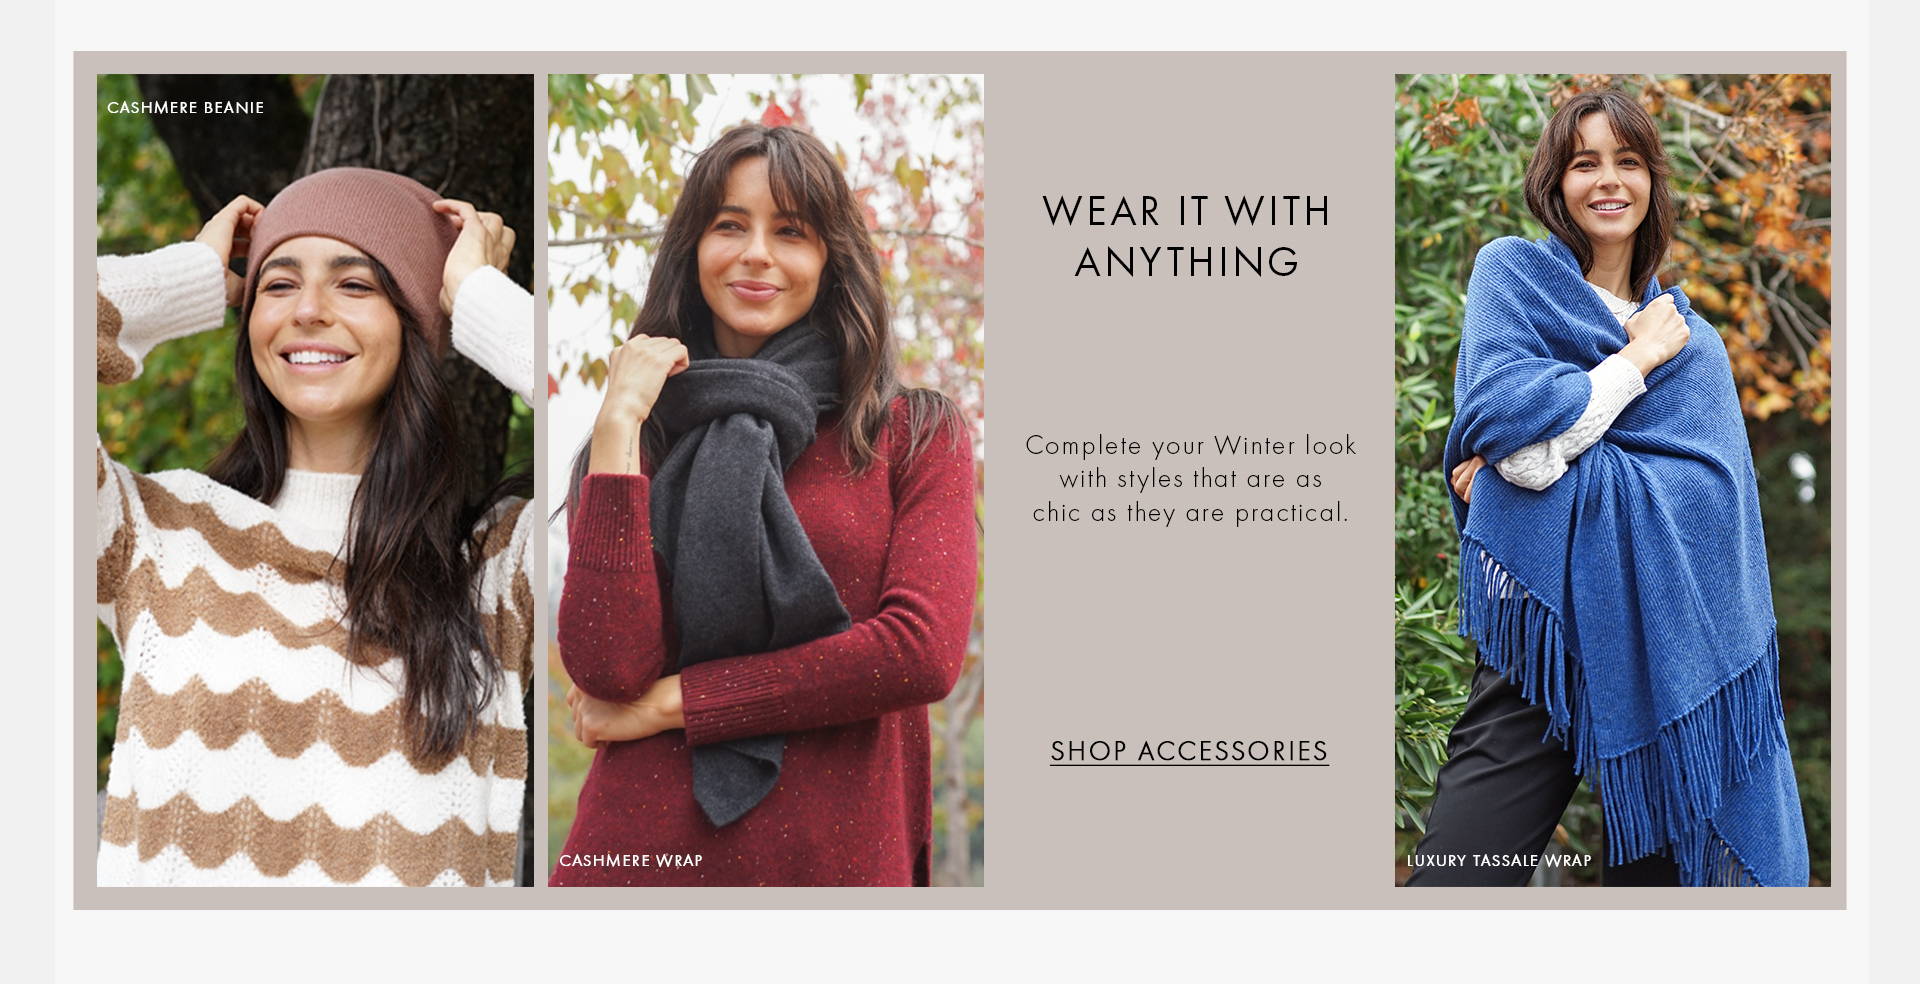 Wear it with anything. Complete your winter look with styles that are as chic as they are practical. Shop Accessories texts on the images with a model wearing a brown white striped pullover and a brown beanie, a model wearing a red pullover with white neps and a scarf on her neck and a model wrapped by a large blue wrap.